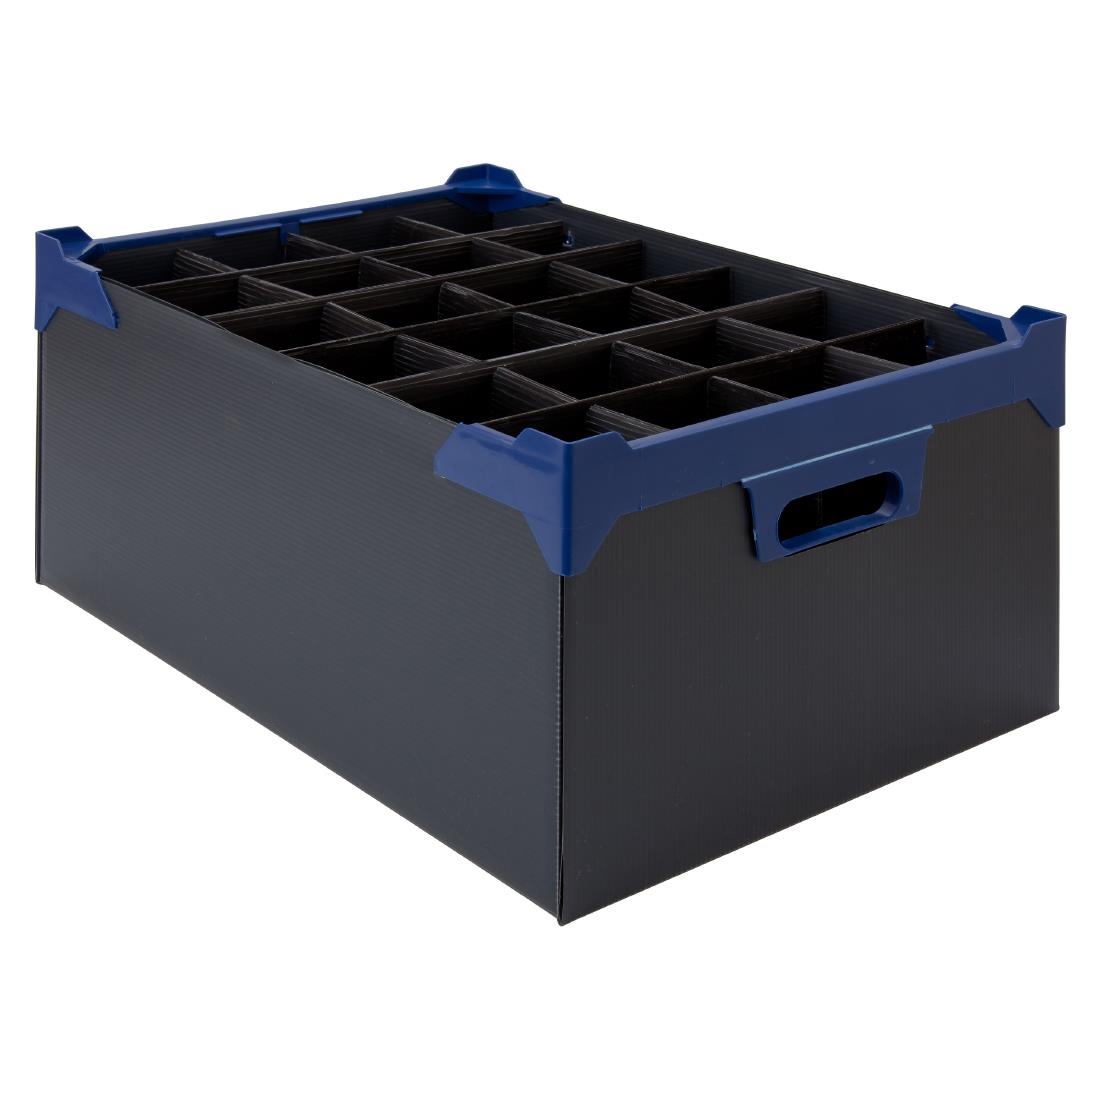 Beaumont Wine Glass Carry Box 500x345x200mm Pack of 5 (CZ623)